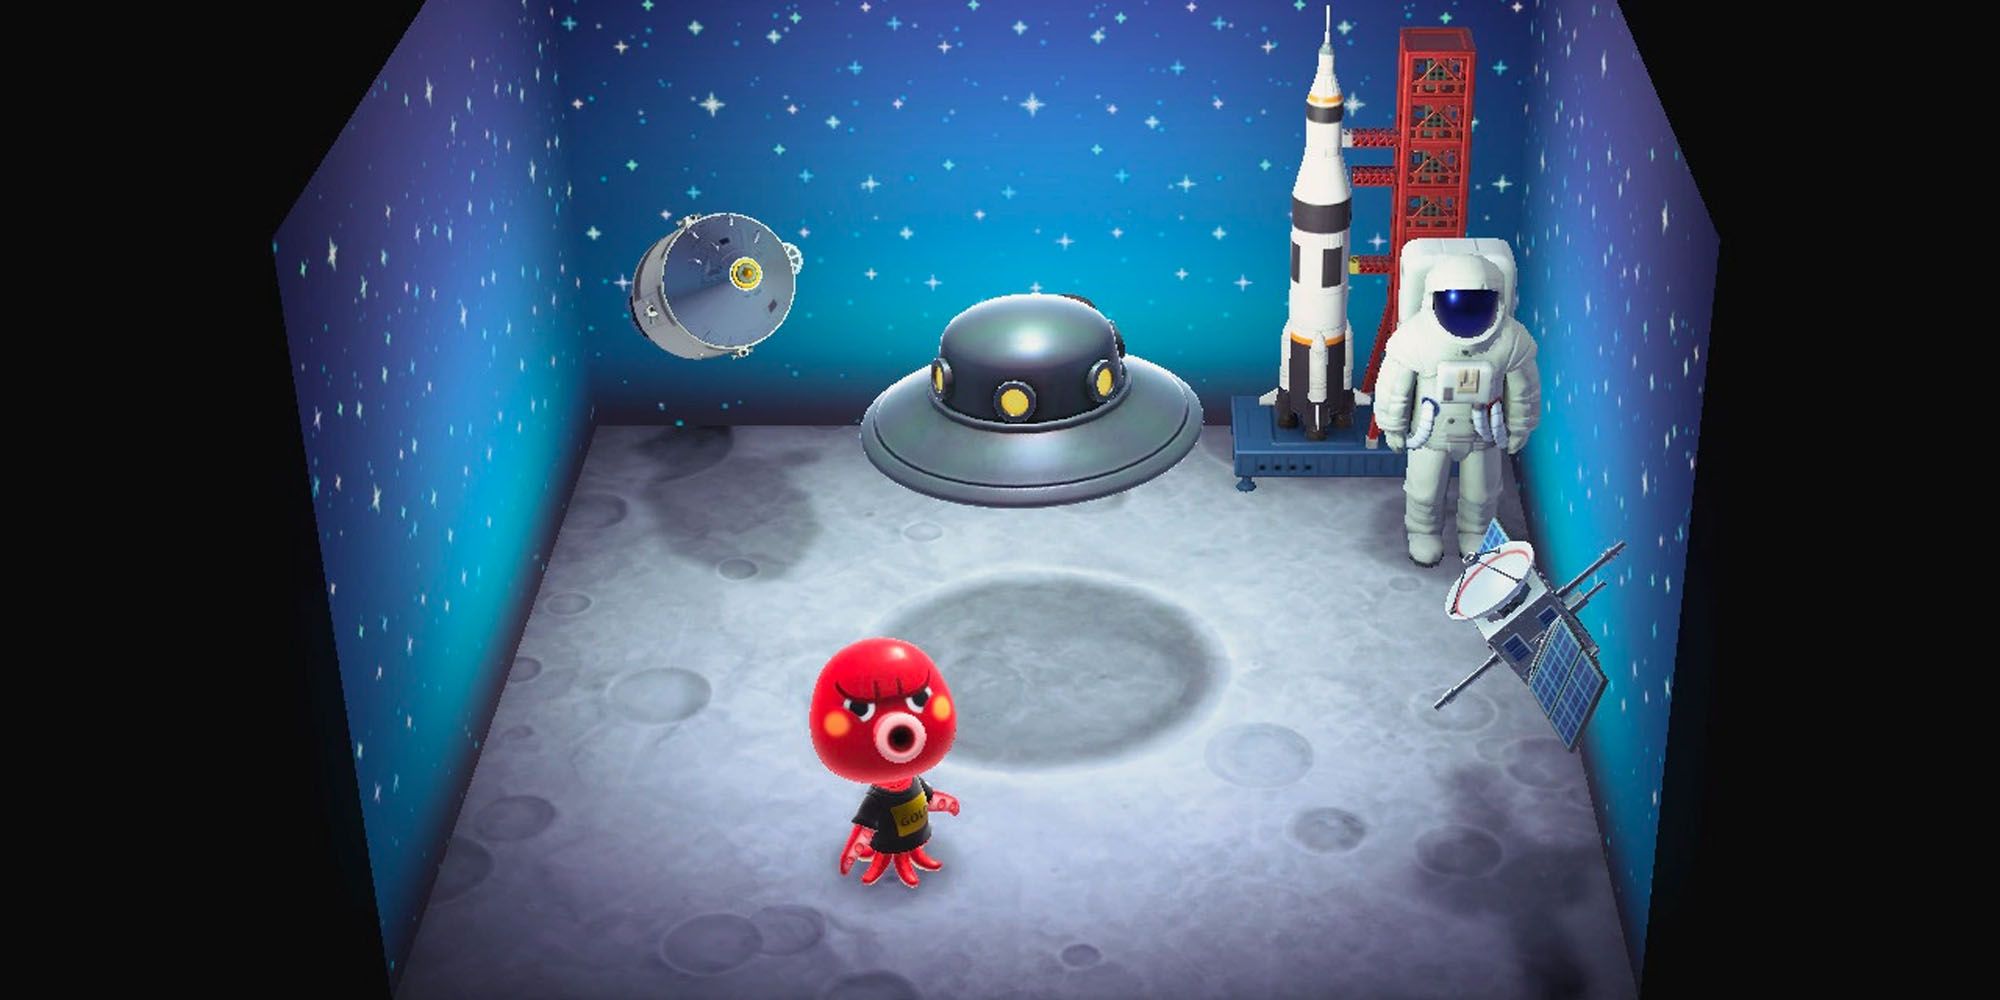 Octavian inside his House in Animal Crossing New Horizons